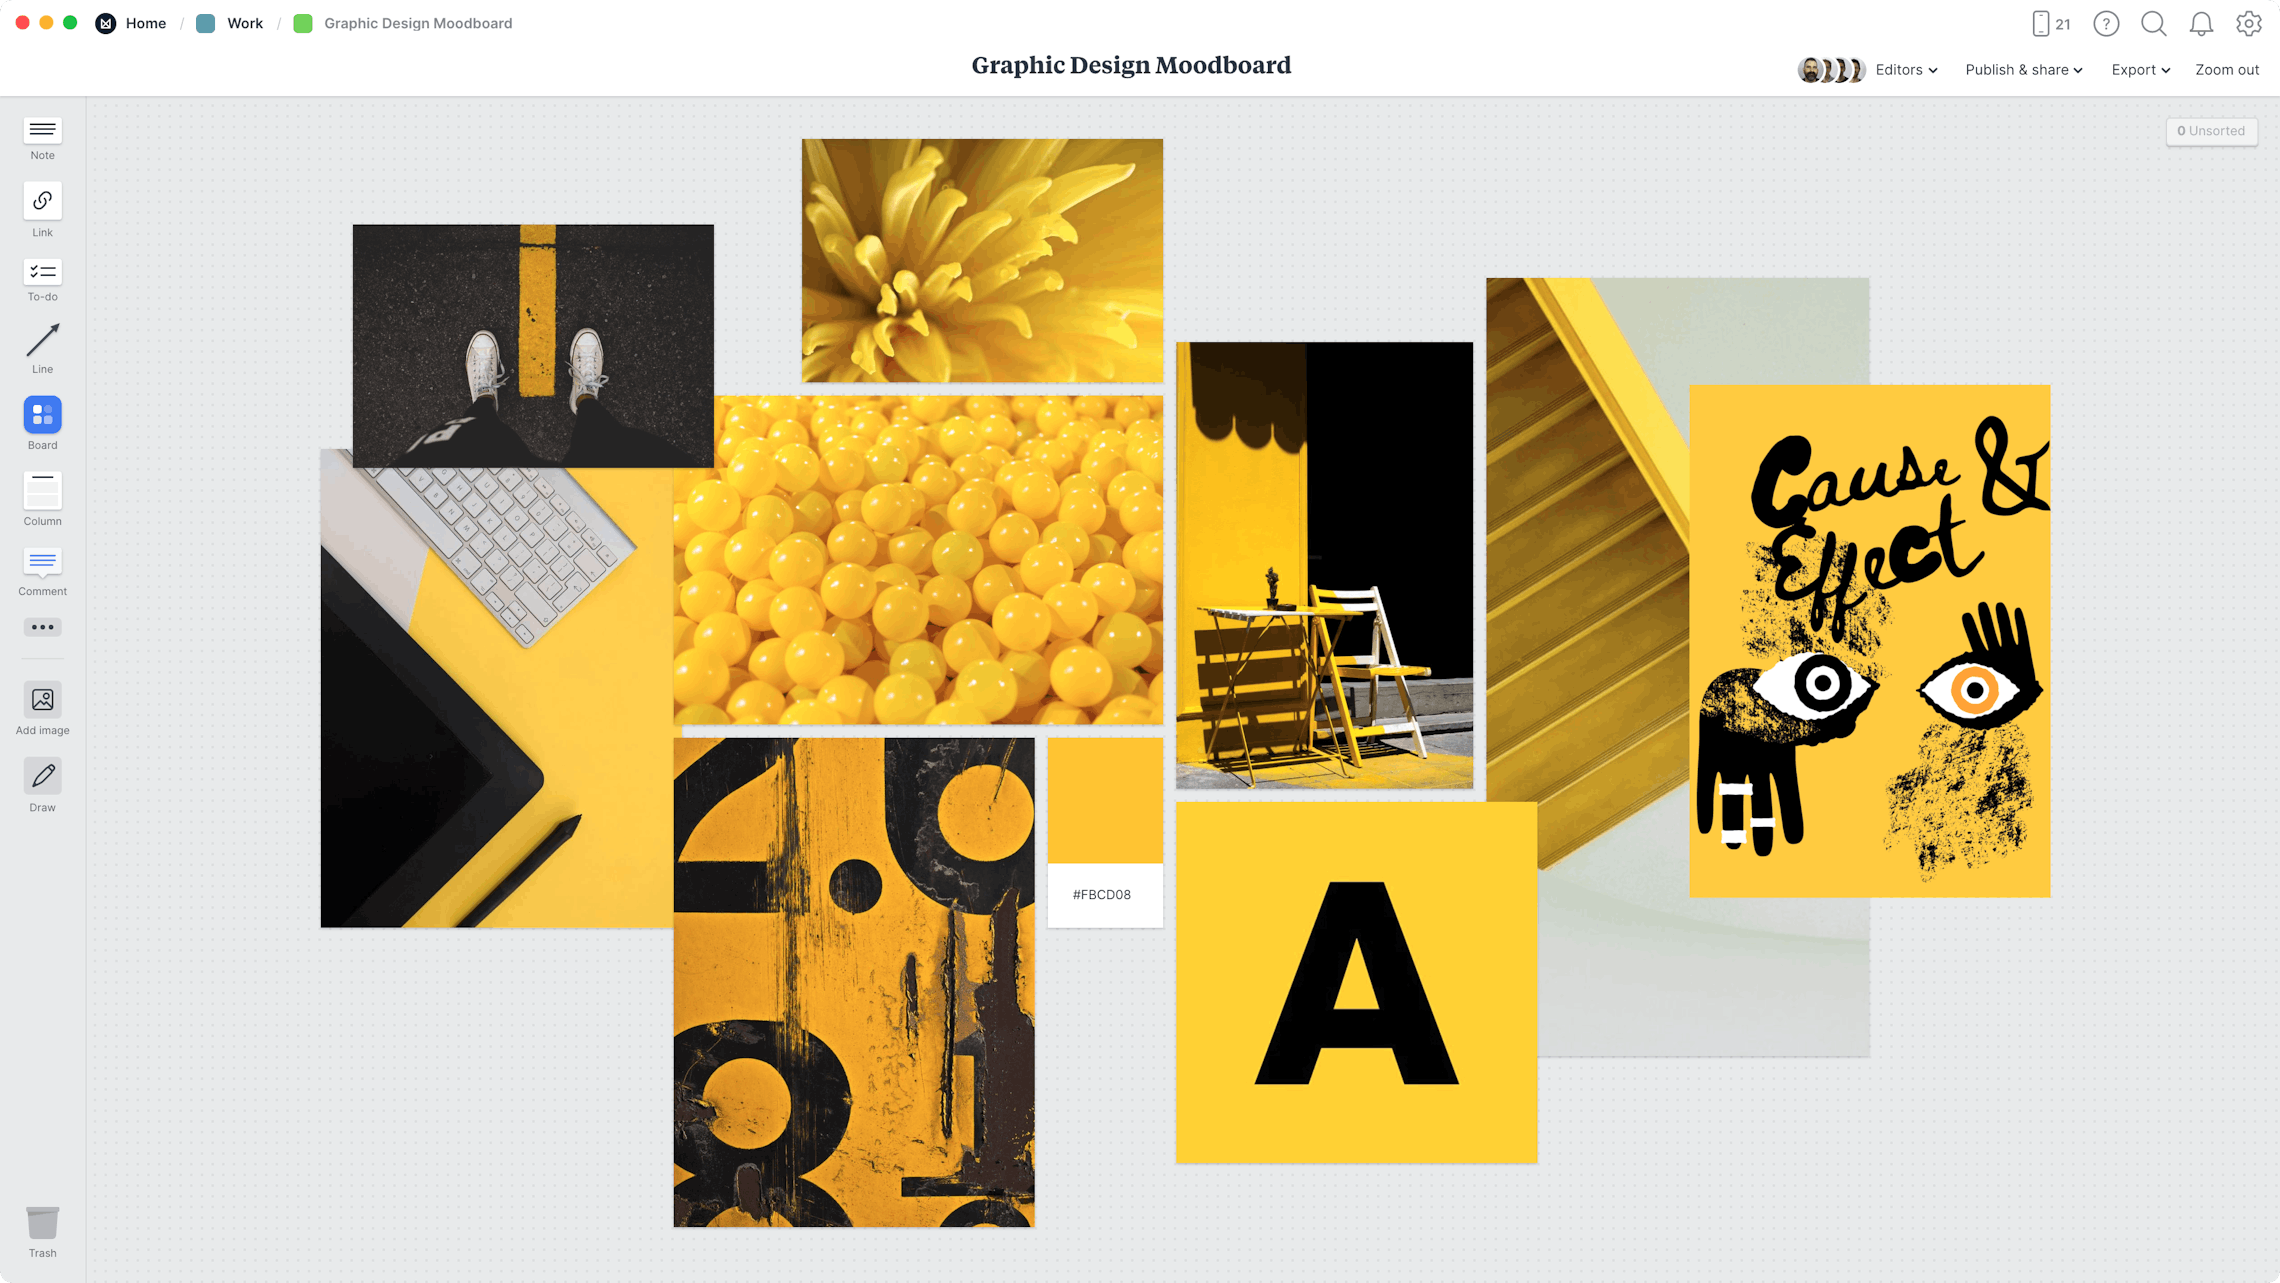 Graphic Design Moodboard Template, within the Milanote app